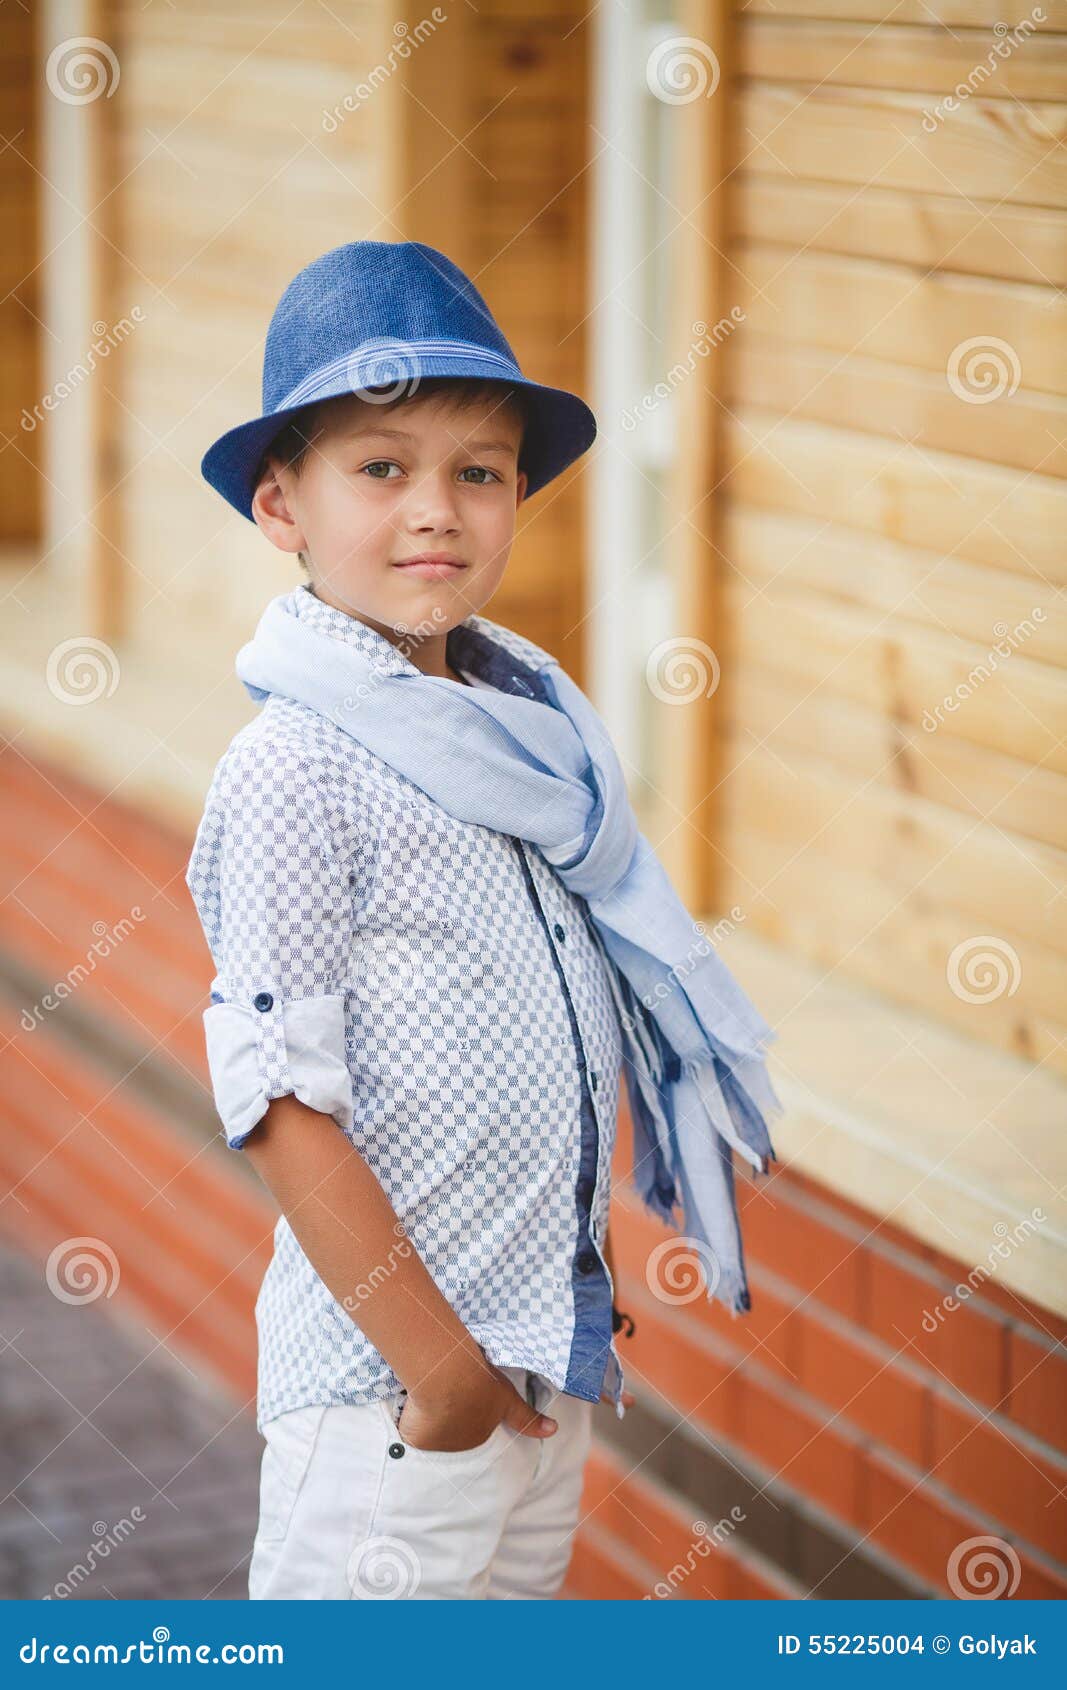 Stylish Boy in the Street Near His Home Stock Photo - Image of ...